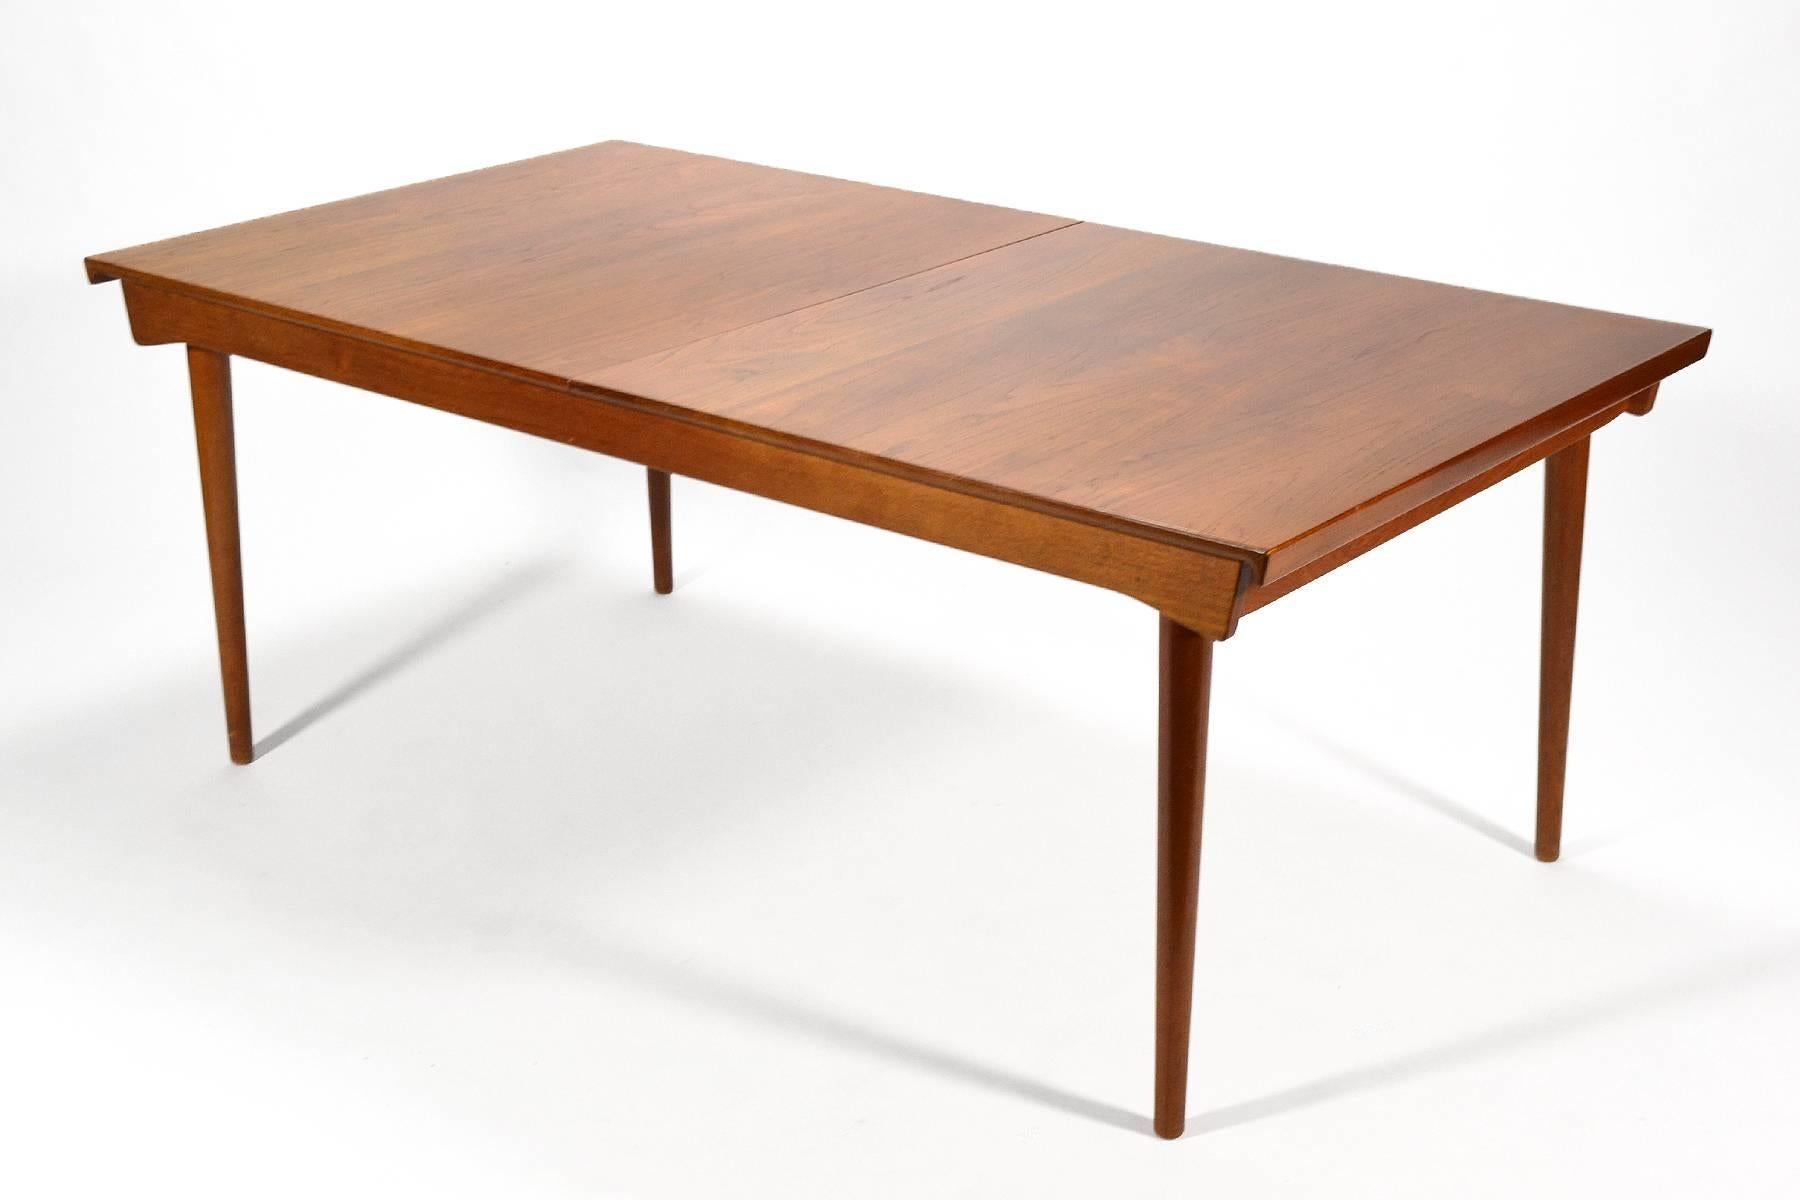 Danish master Finn Juhl's importance cannot be understated and whether he was collaborating with Neils Vodder or France & Sons his sensibility shines. This table is a perfect example. Crafted of solid teak, it features a top with sculpted ends which